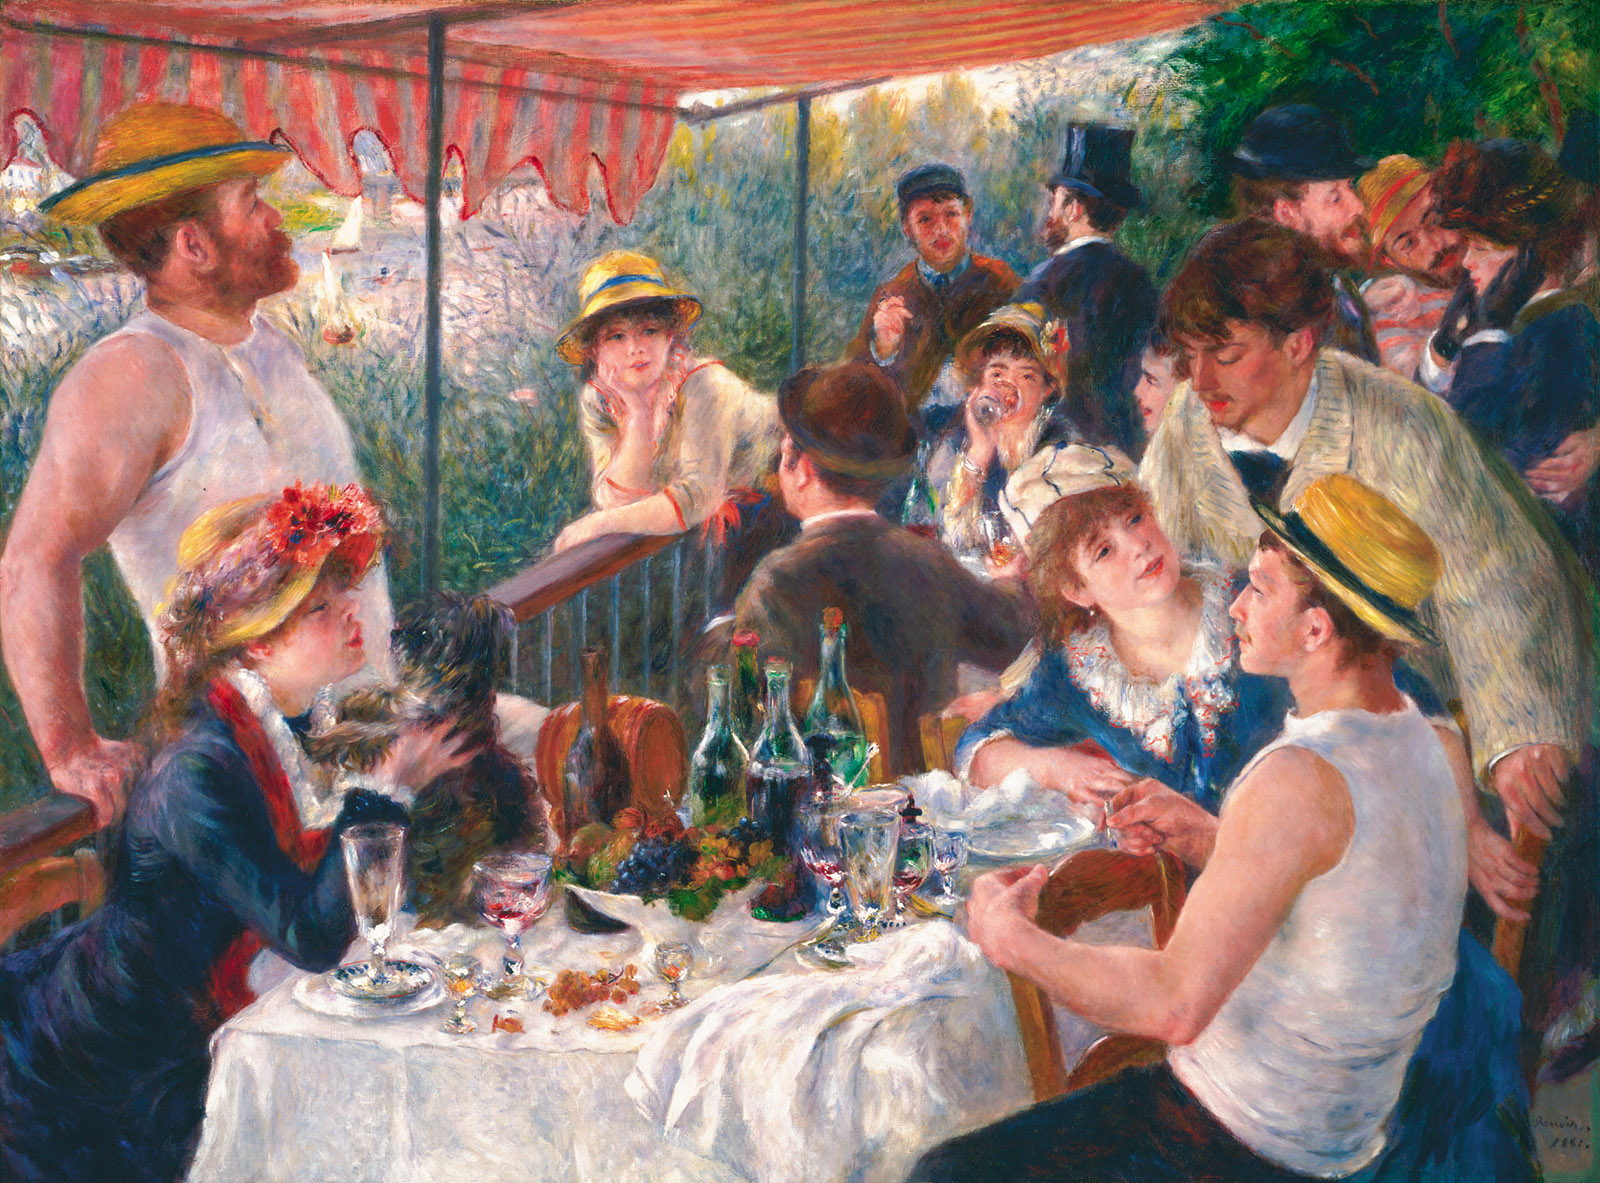 Pierre-August Renoir: Luncheon of the Boating Party, 1880–1881